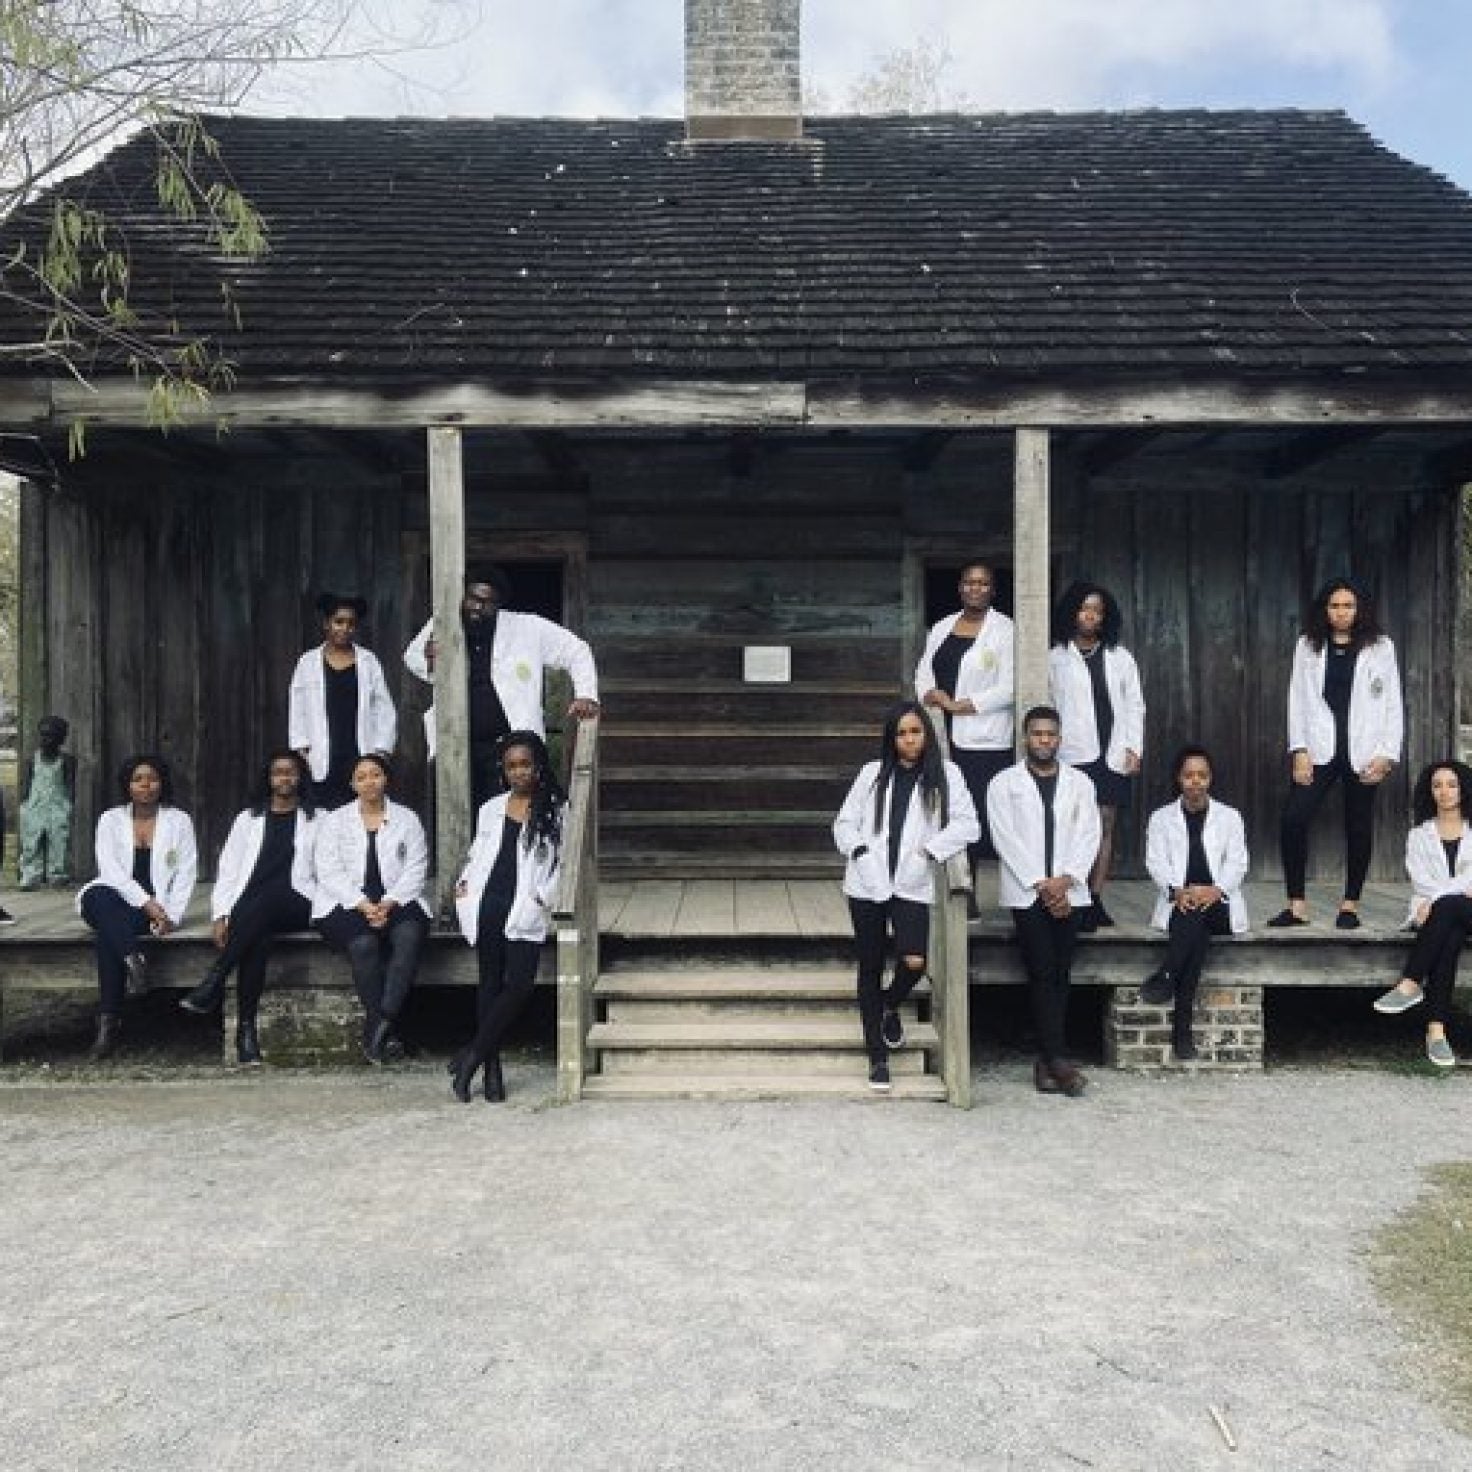 #BlackExcellence: Viral Photo Shows Black Medical Students Posed In Front Of Former Slave Quarters